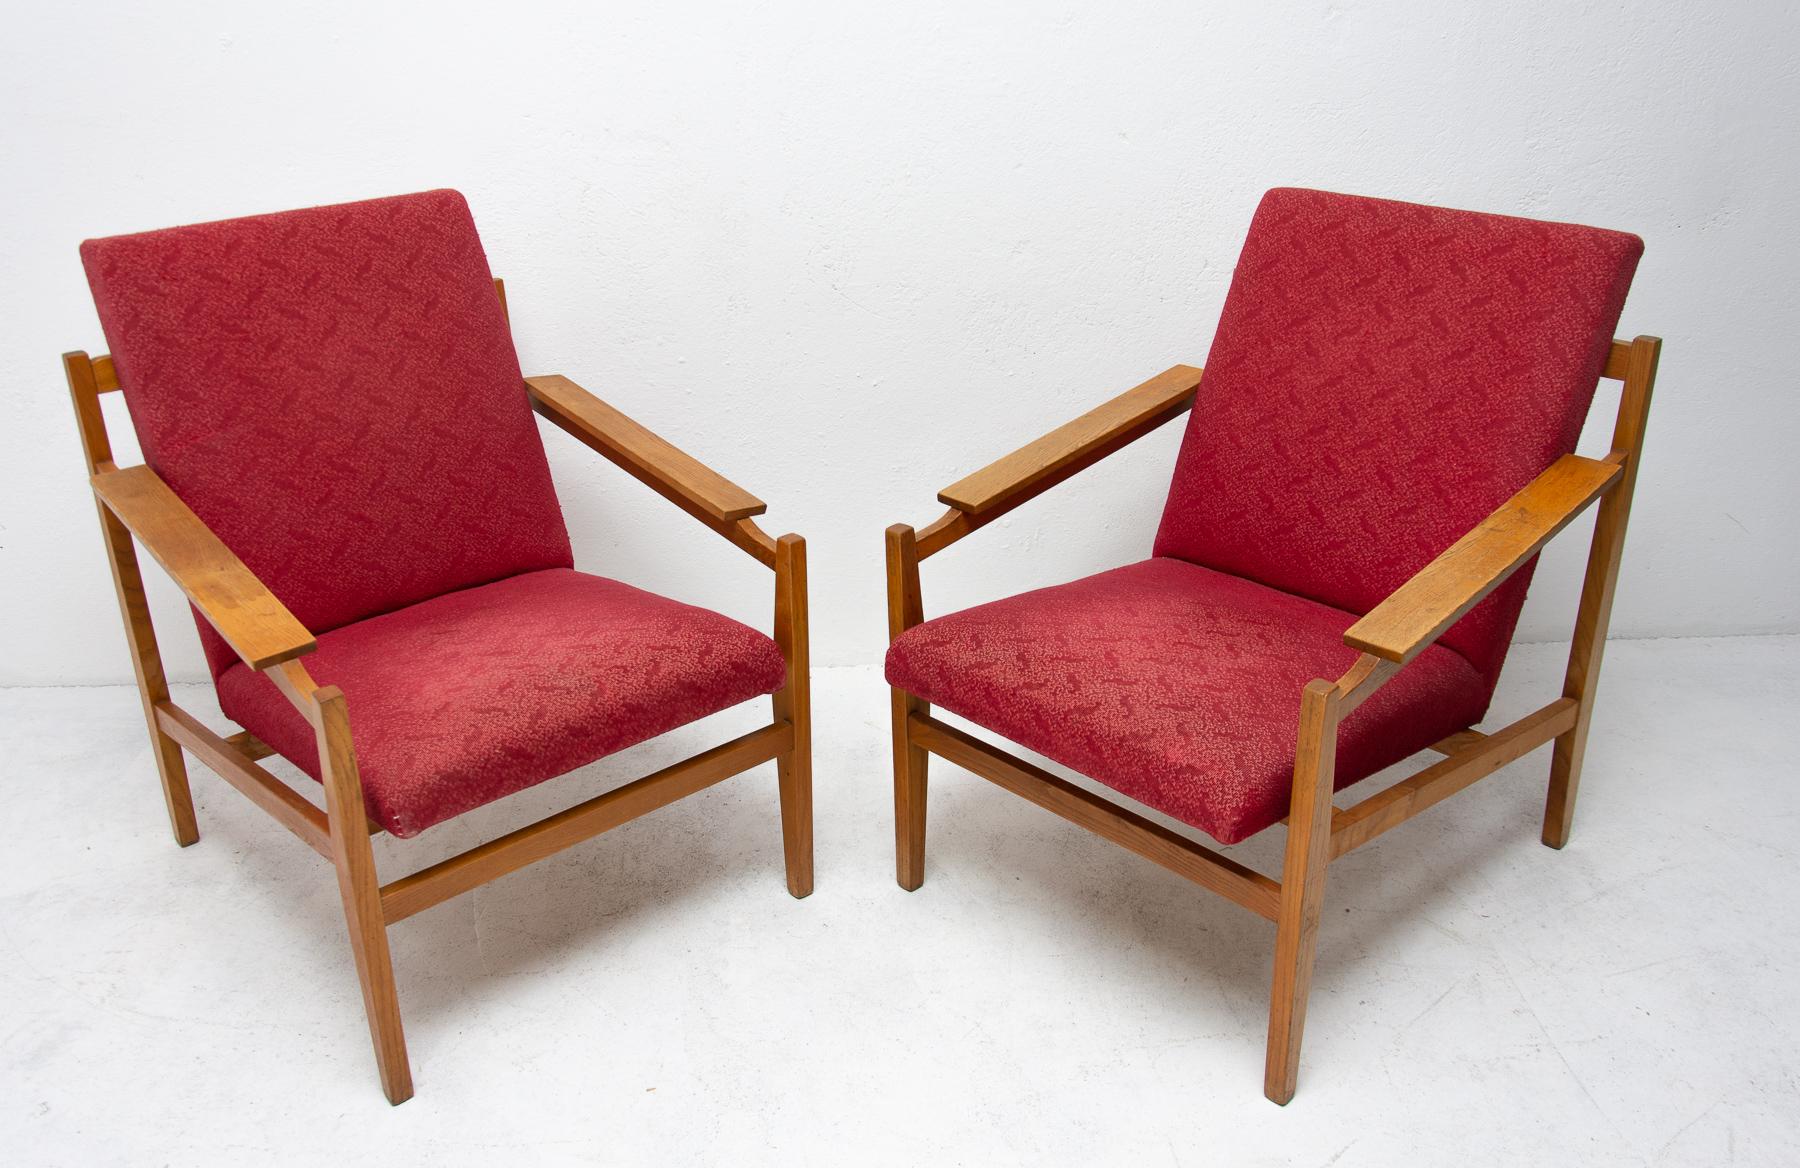 This beautiful pair of midcentury armchairs was produced in the 1960s. It features a beech wood structure and removable cushions in original upholstery. The chairs are fully functional, but it shows sign of age through some abrasions or faded